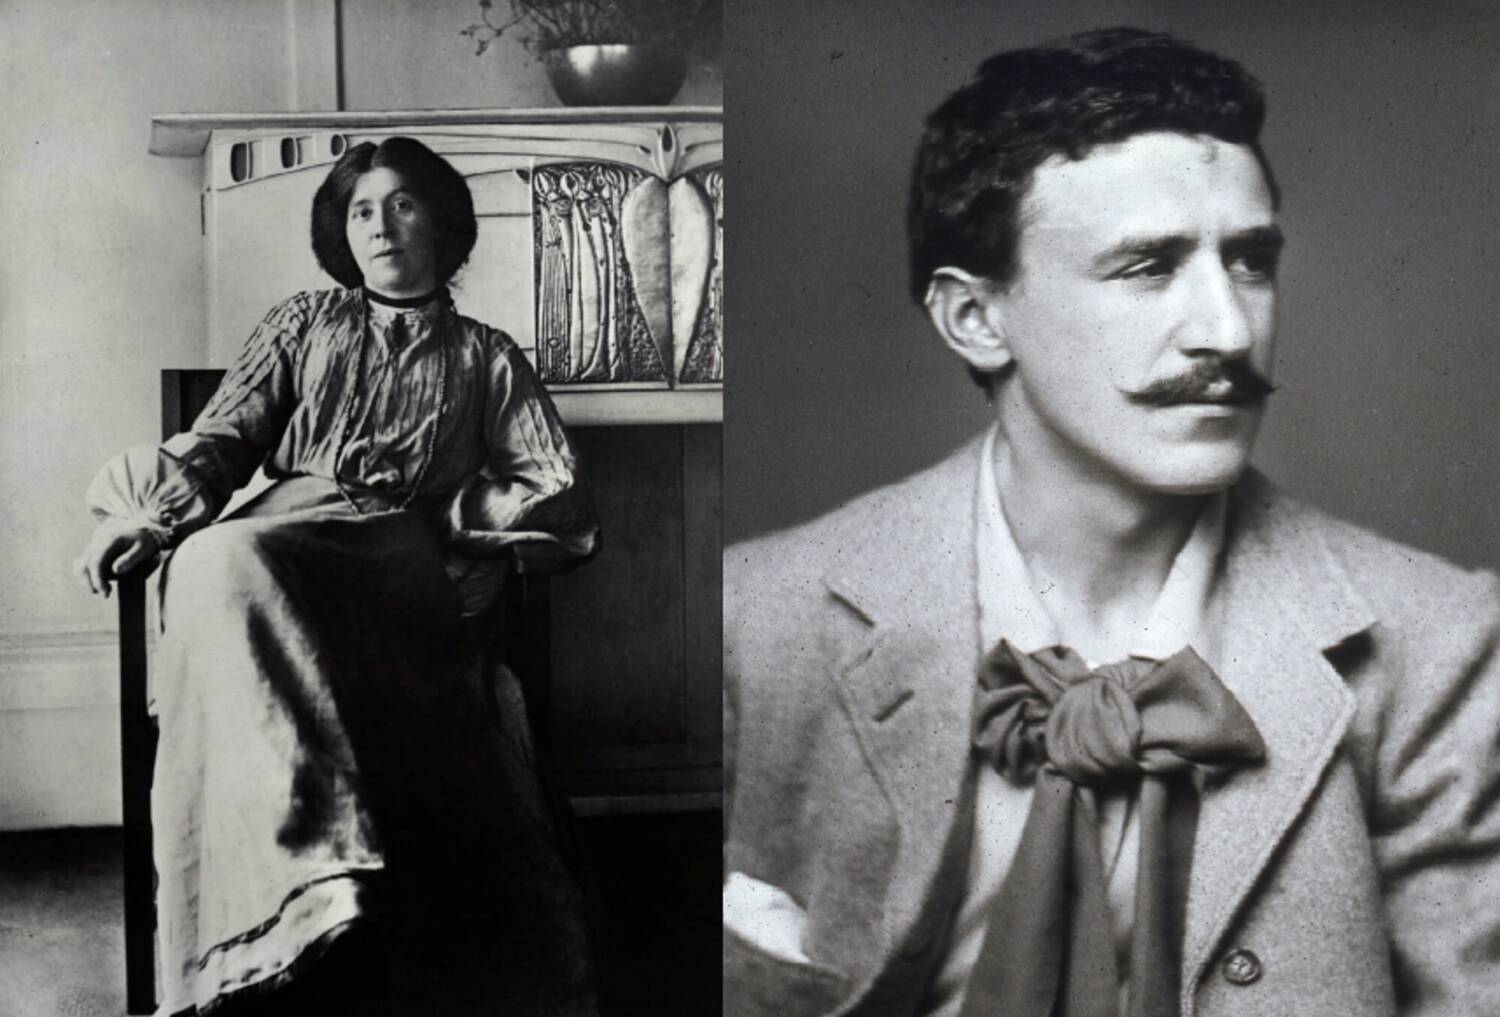 Two black and white photos side by side: on the left is a woman in a long dress sitting on a chair in front of a fireplace: the photo on the right shows the head and shoulders of a young man with dark hair. He has a distinctive moustache and a cravat.